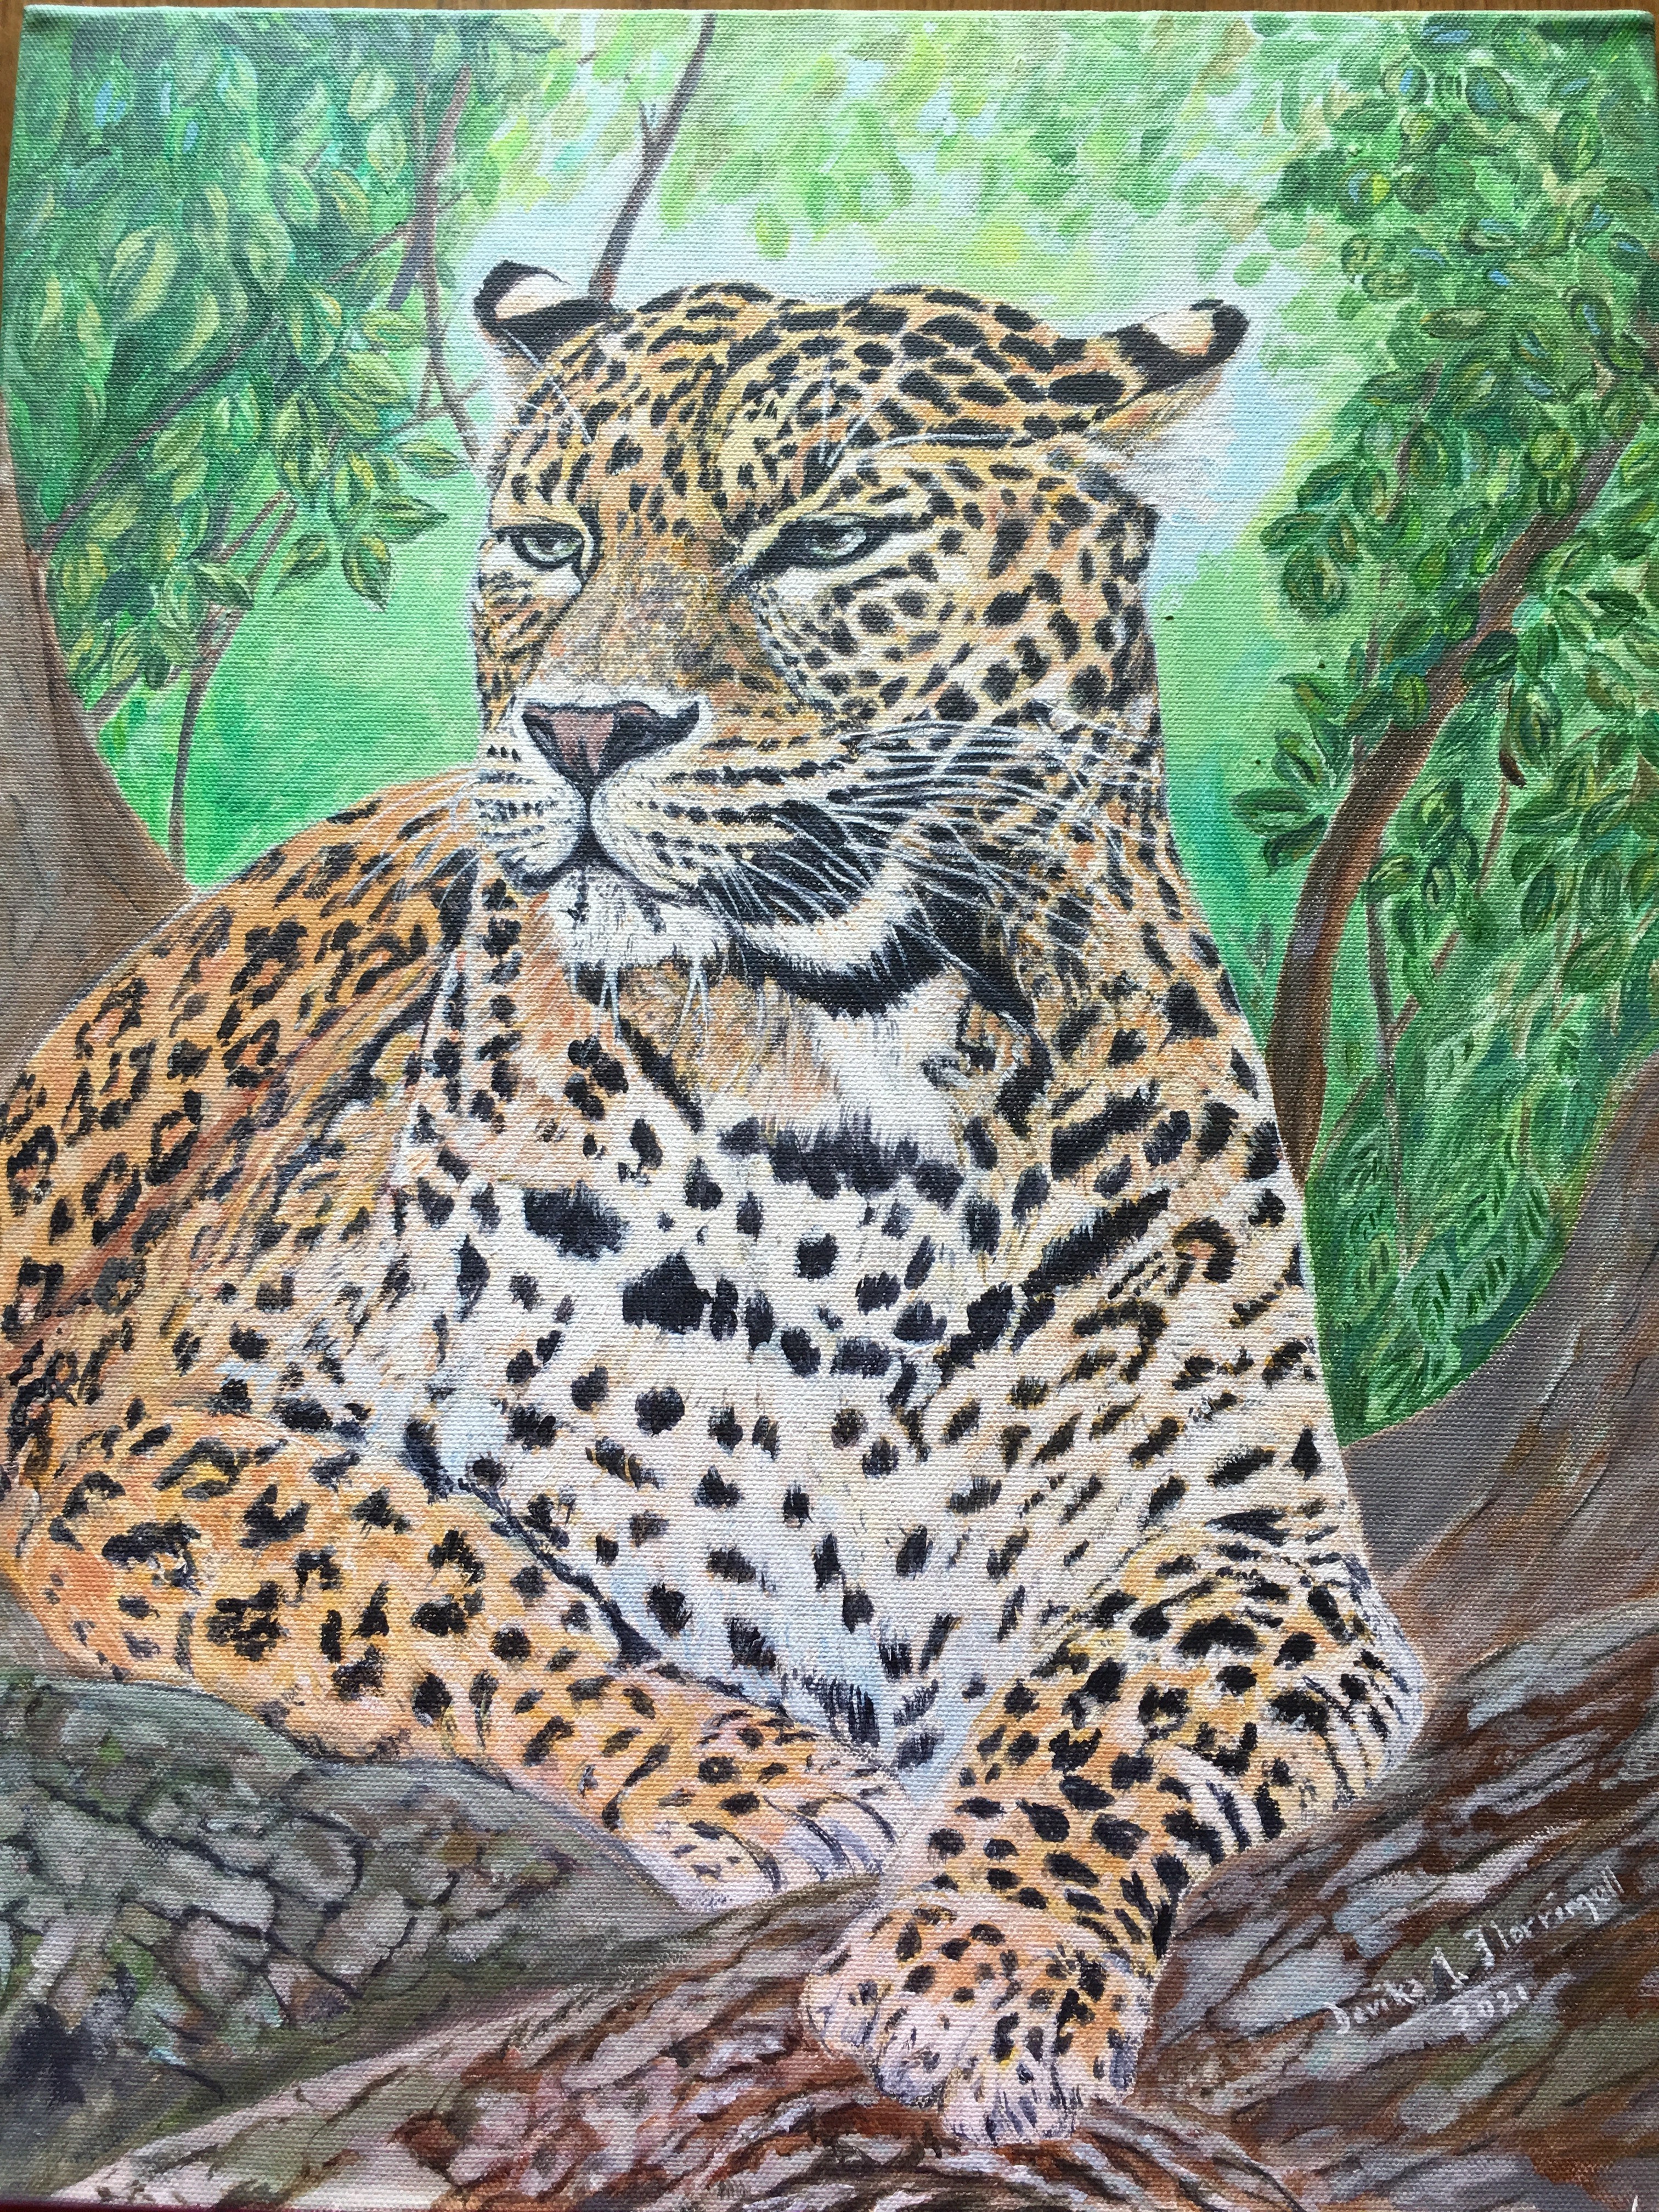 From my perch atop the tree by Devika Ilayperuma-Florrimell